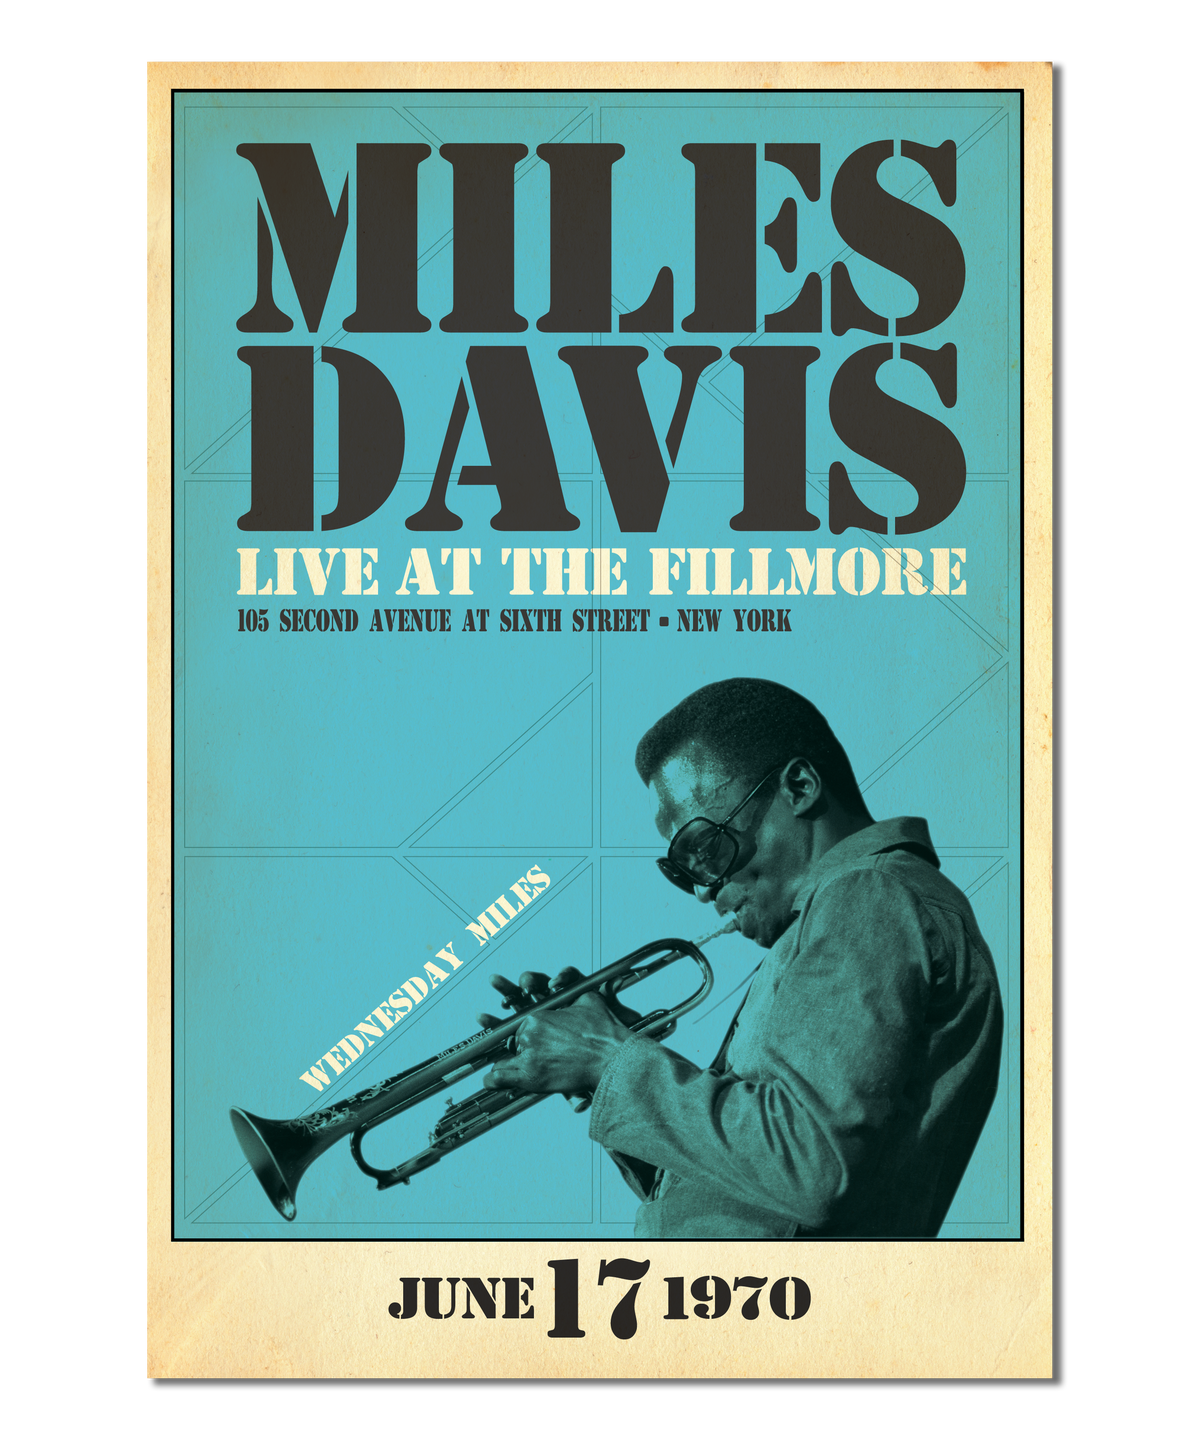 Miles Davis Live at the Fillmore: Wednesday Miles